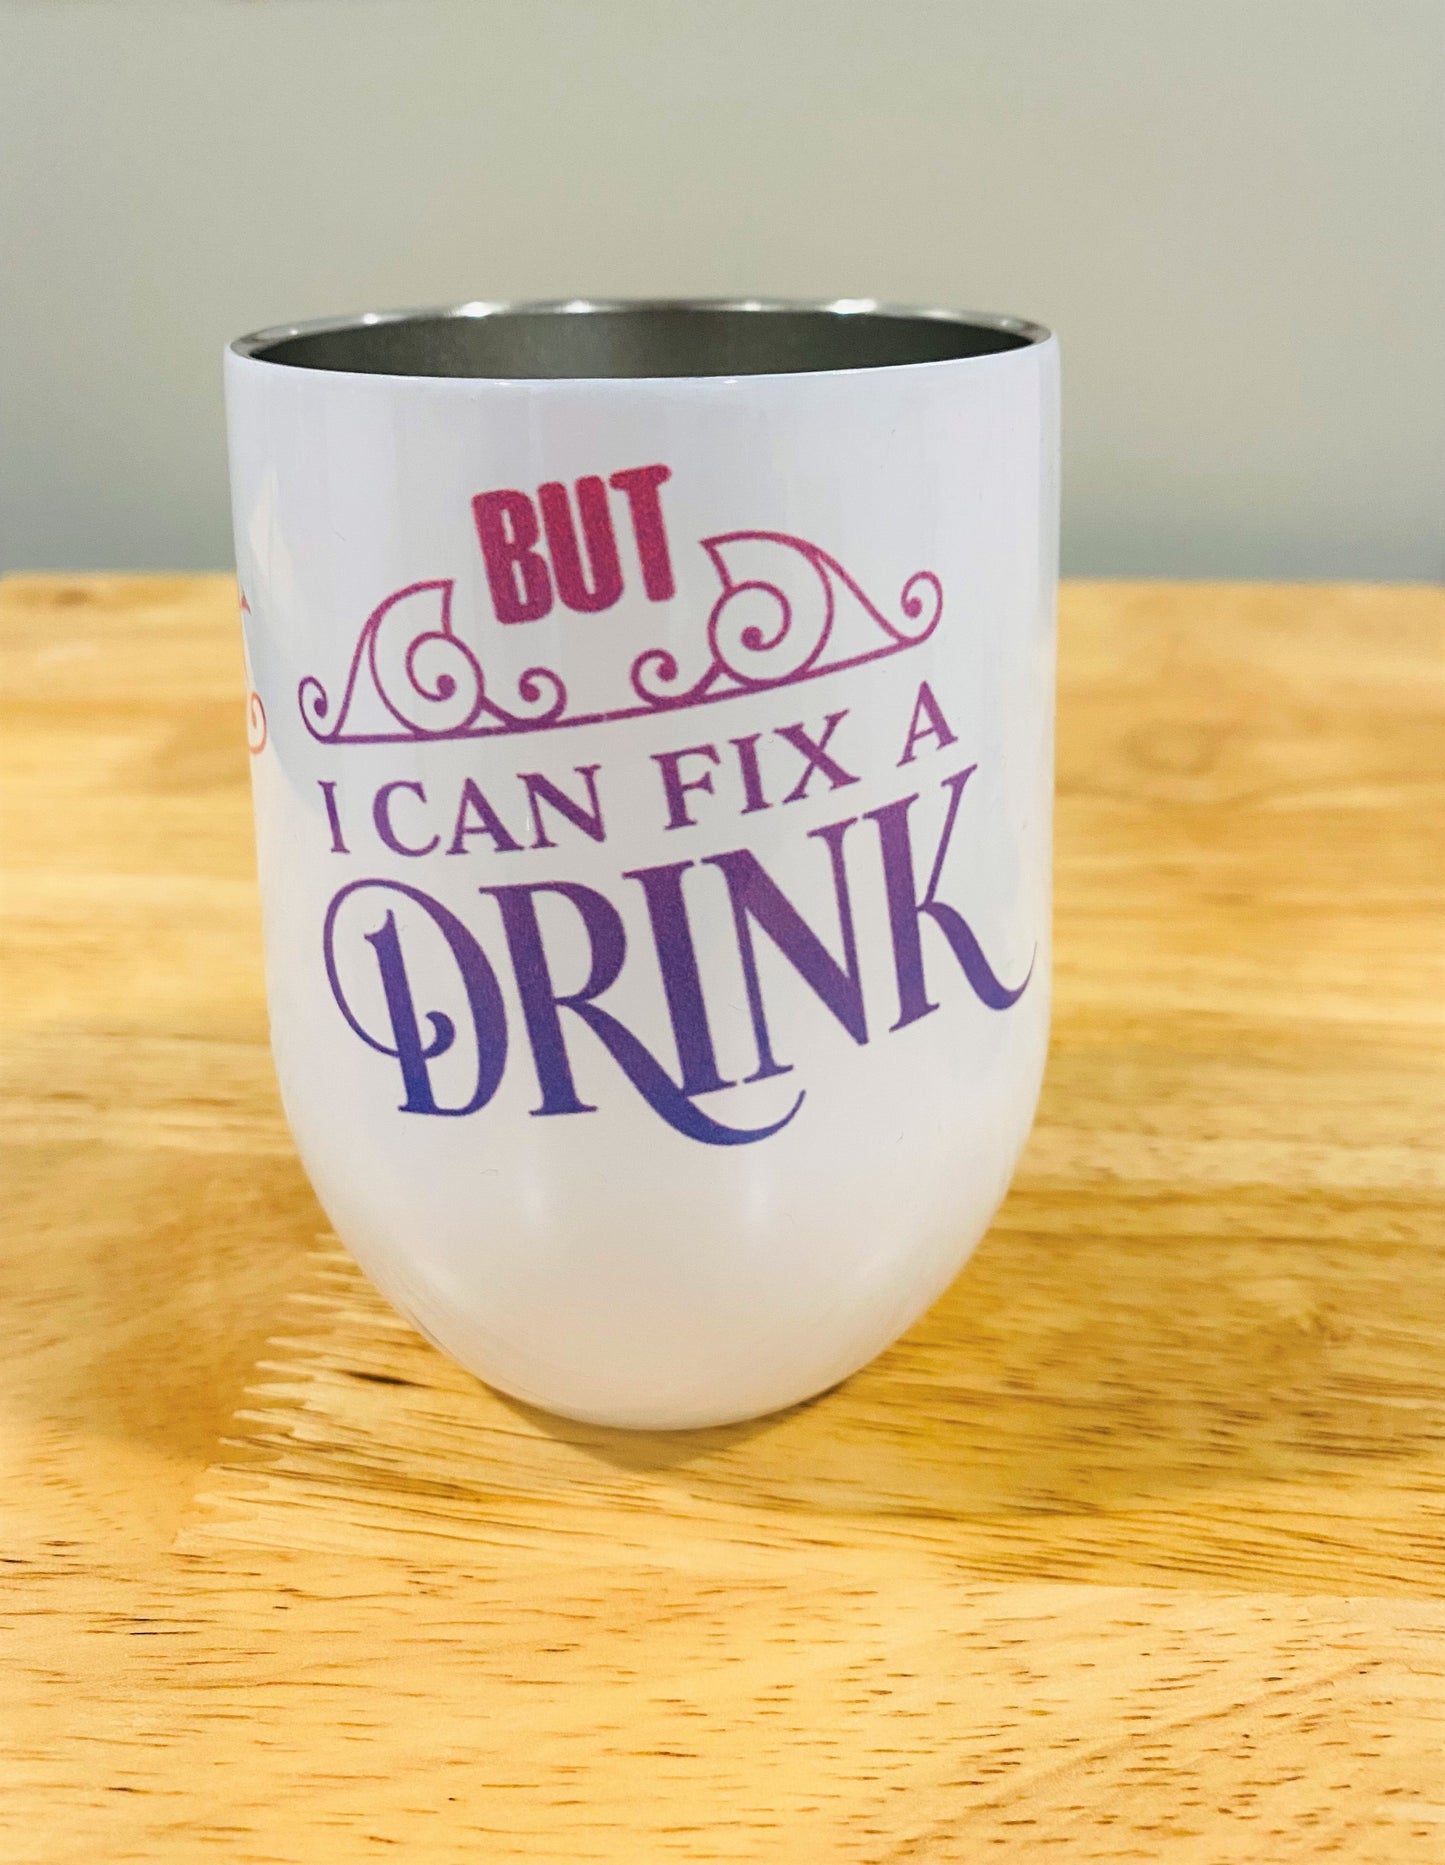 I Can't Fix The Weather Wine Tumbler